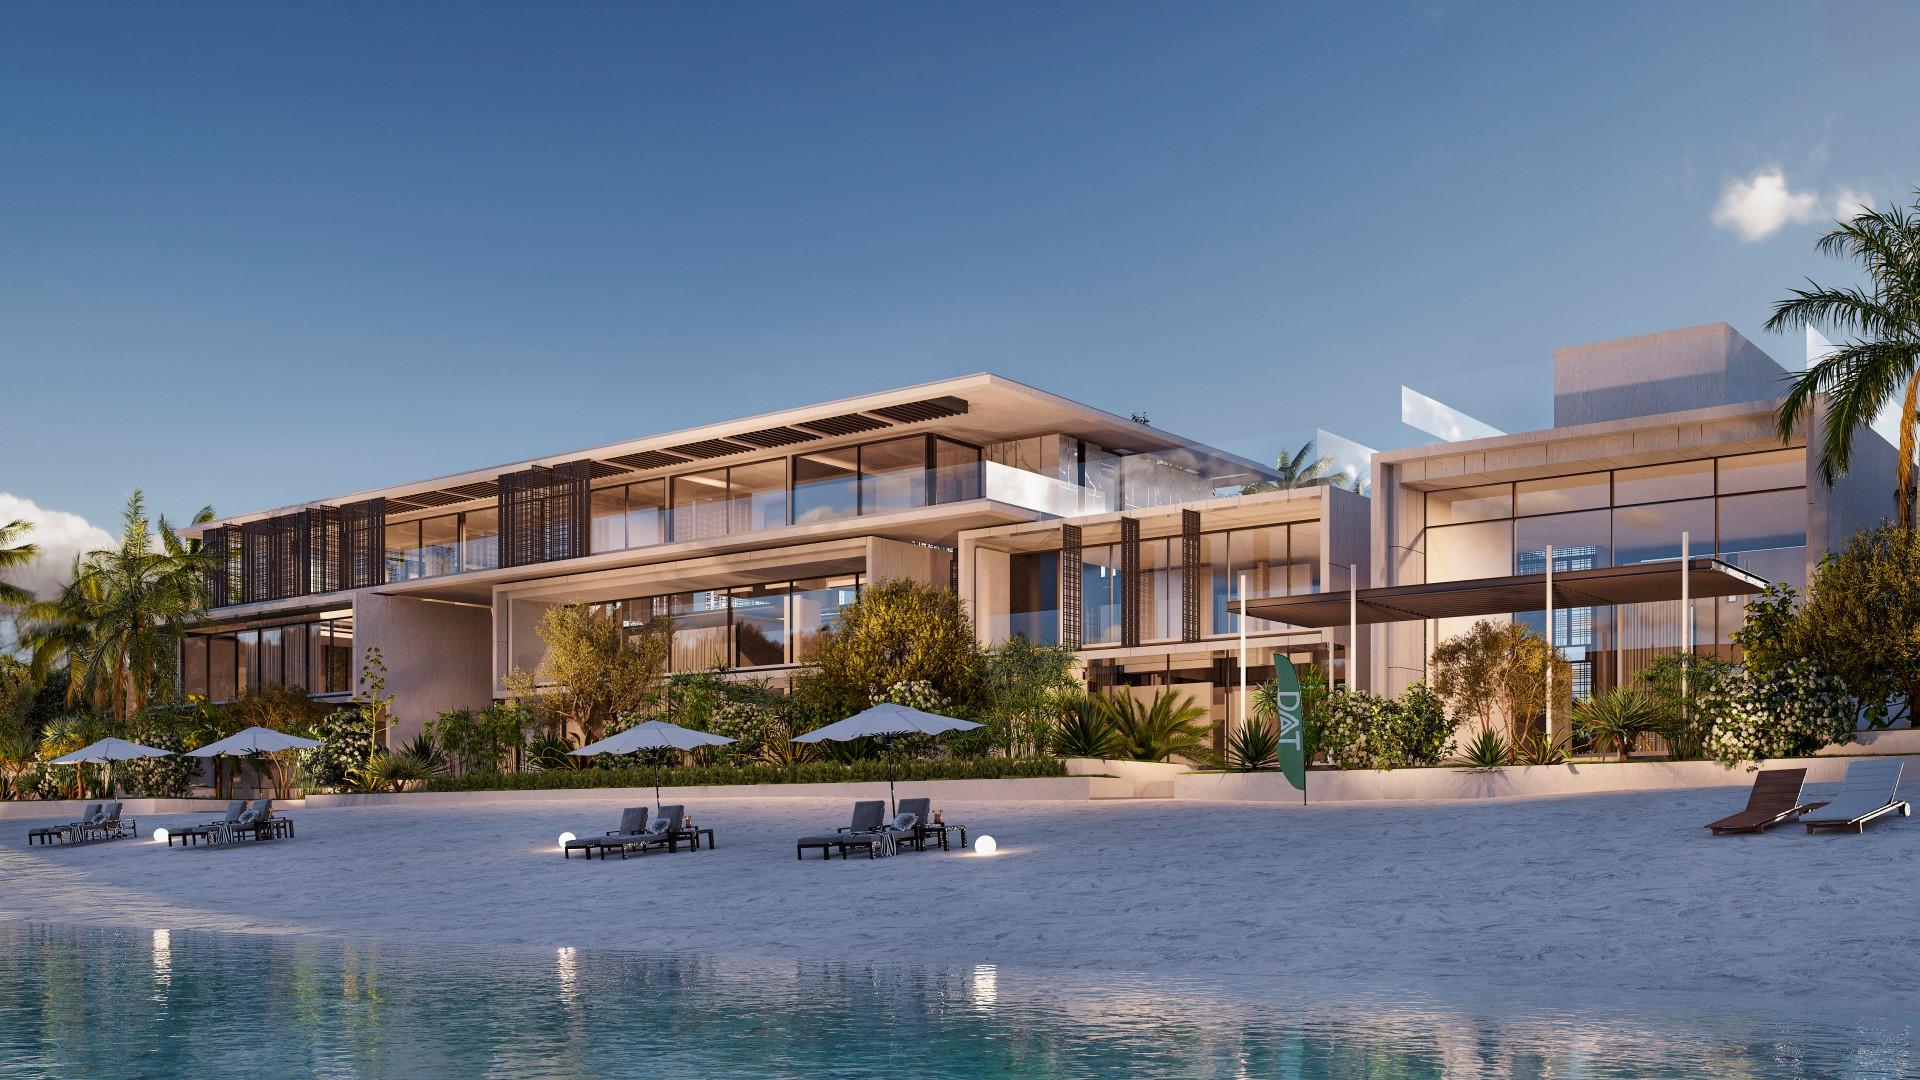 Beachfront Villa in Palm Jumeirah by DAT Engineering Consultancy